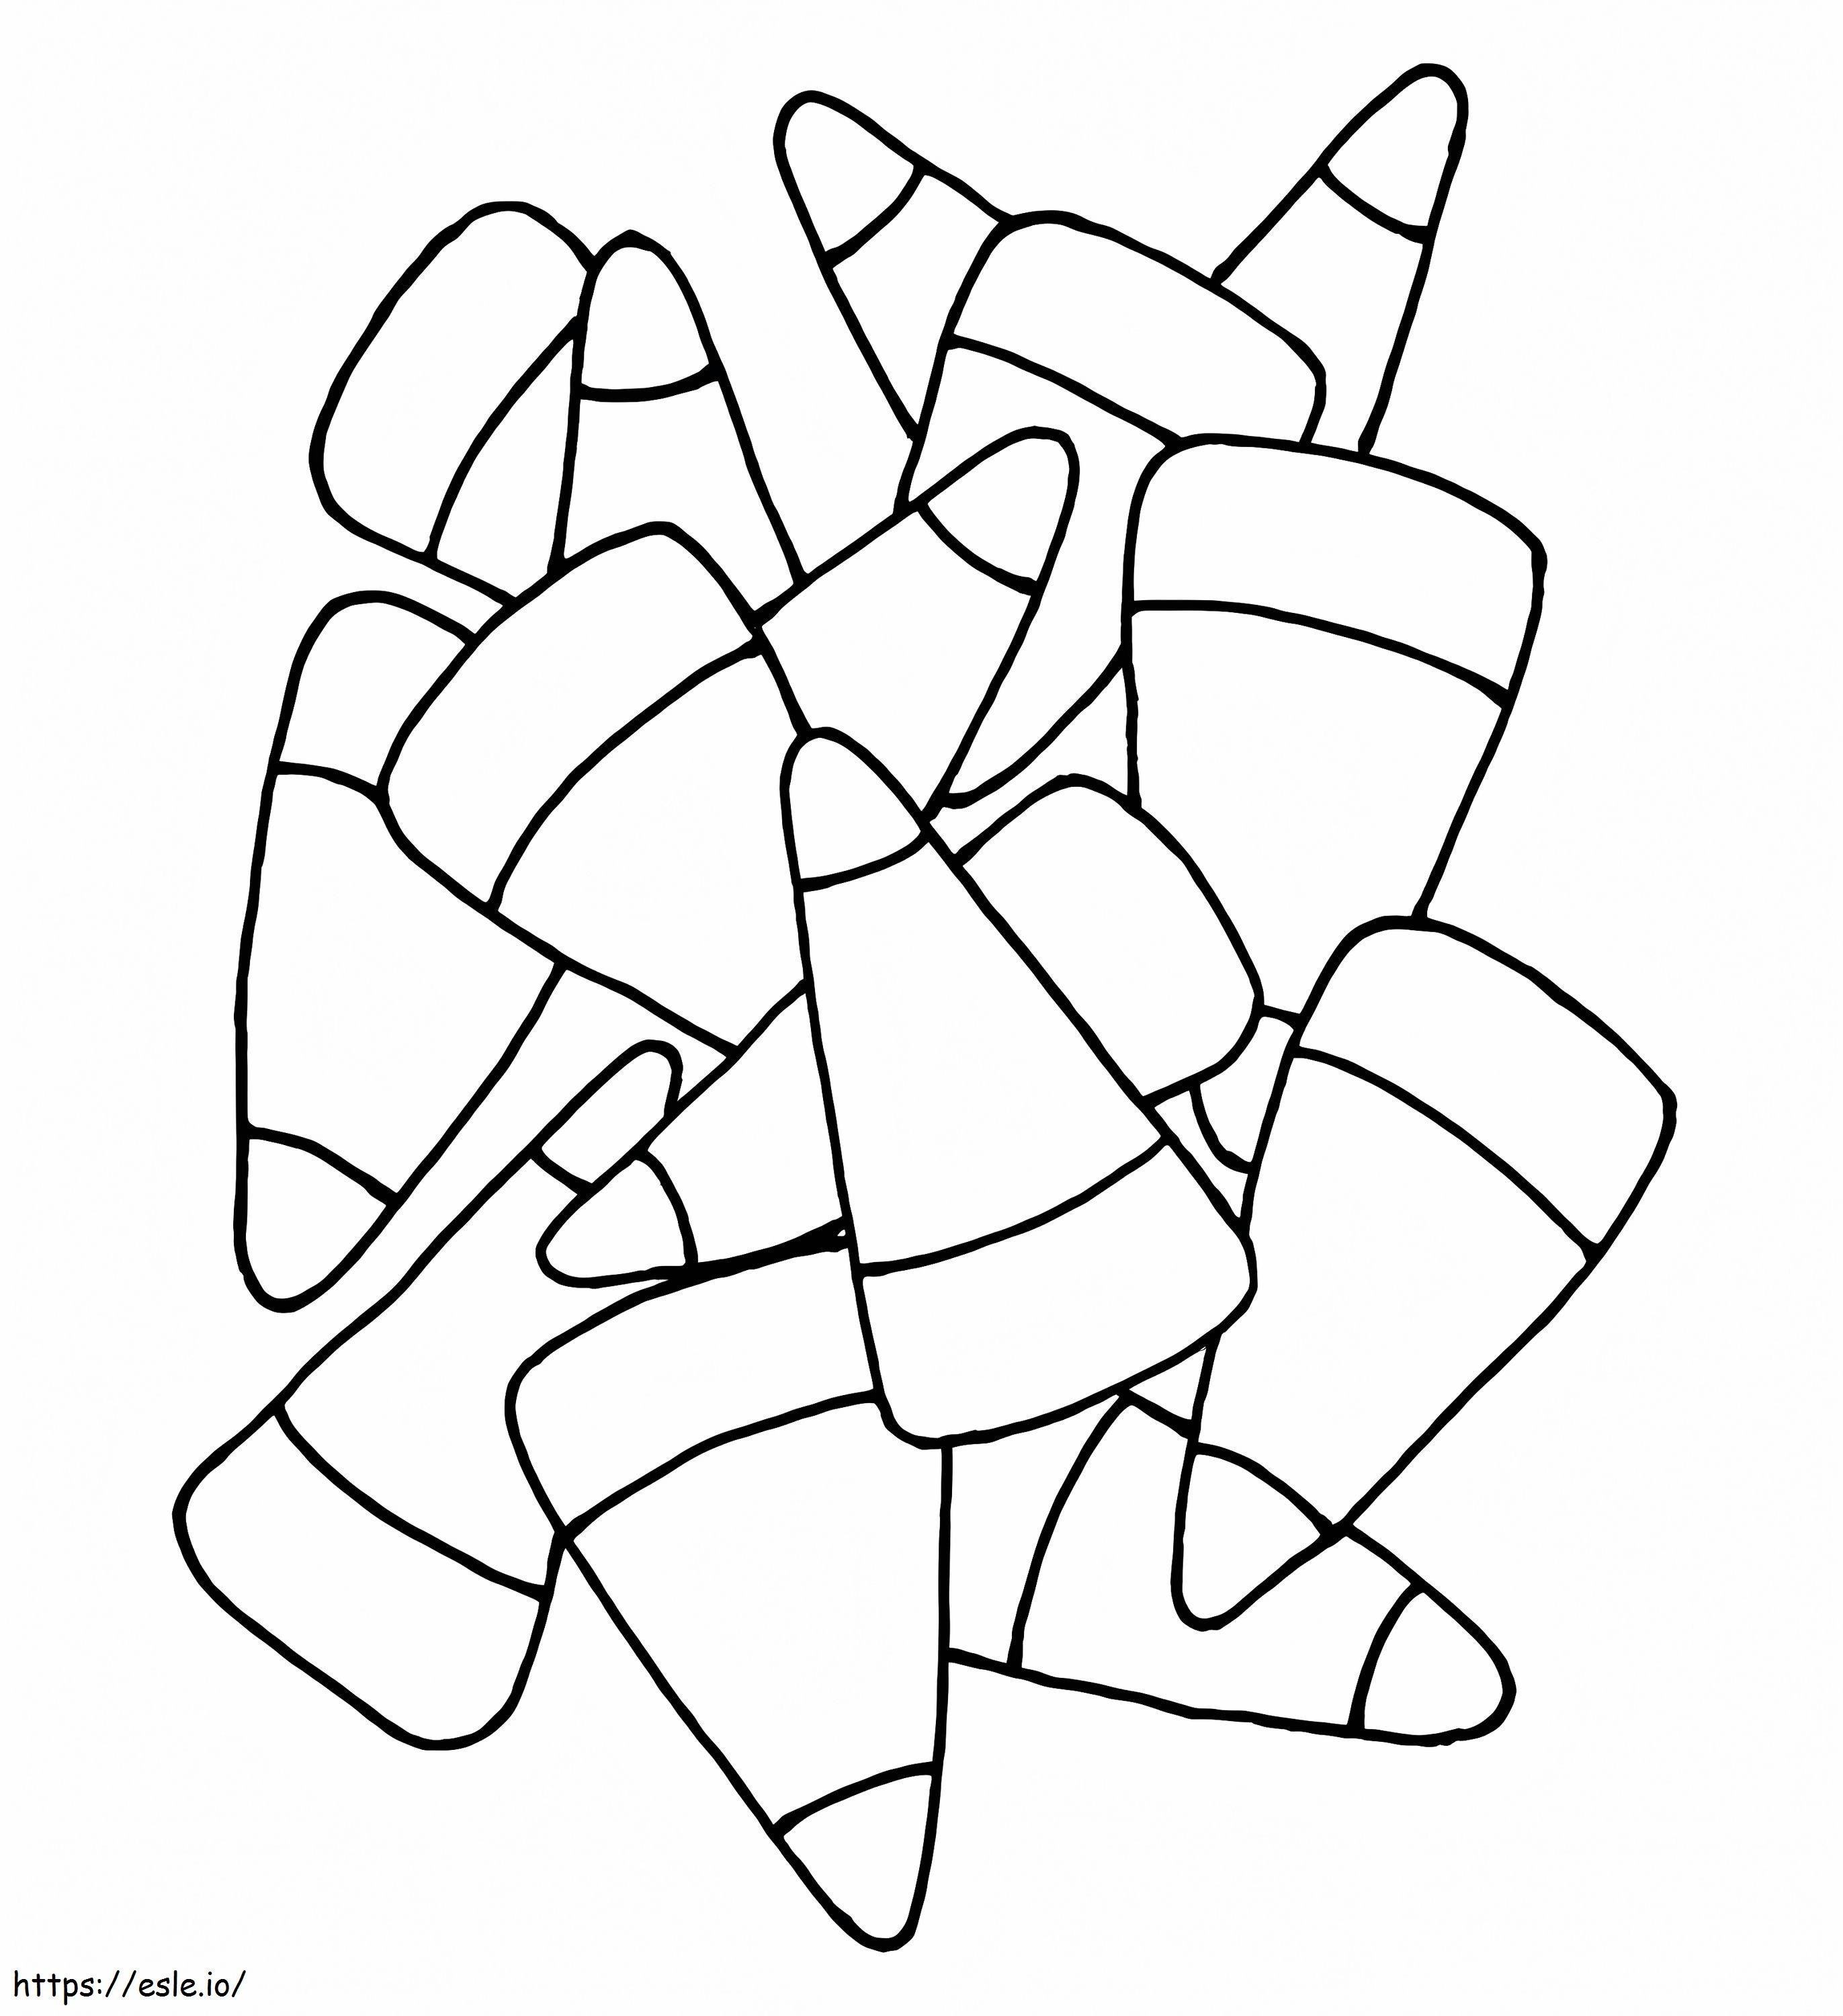 Free Candy Corn Coloring Page